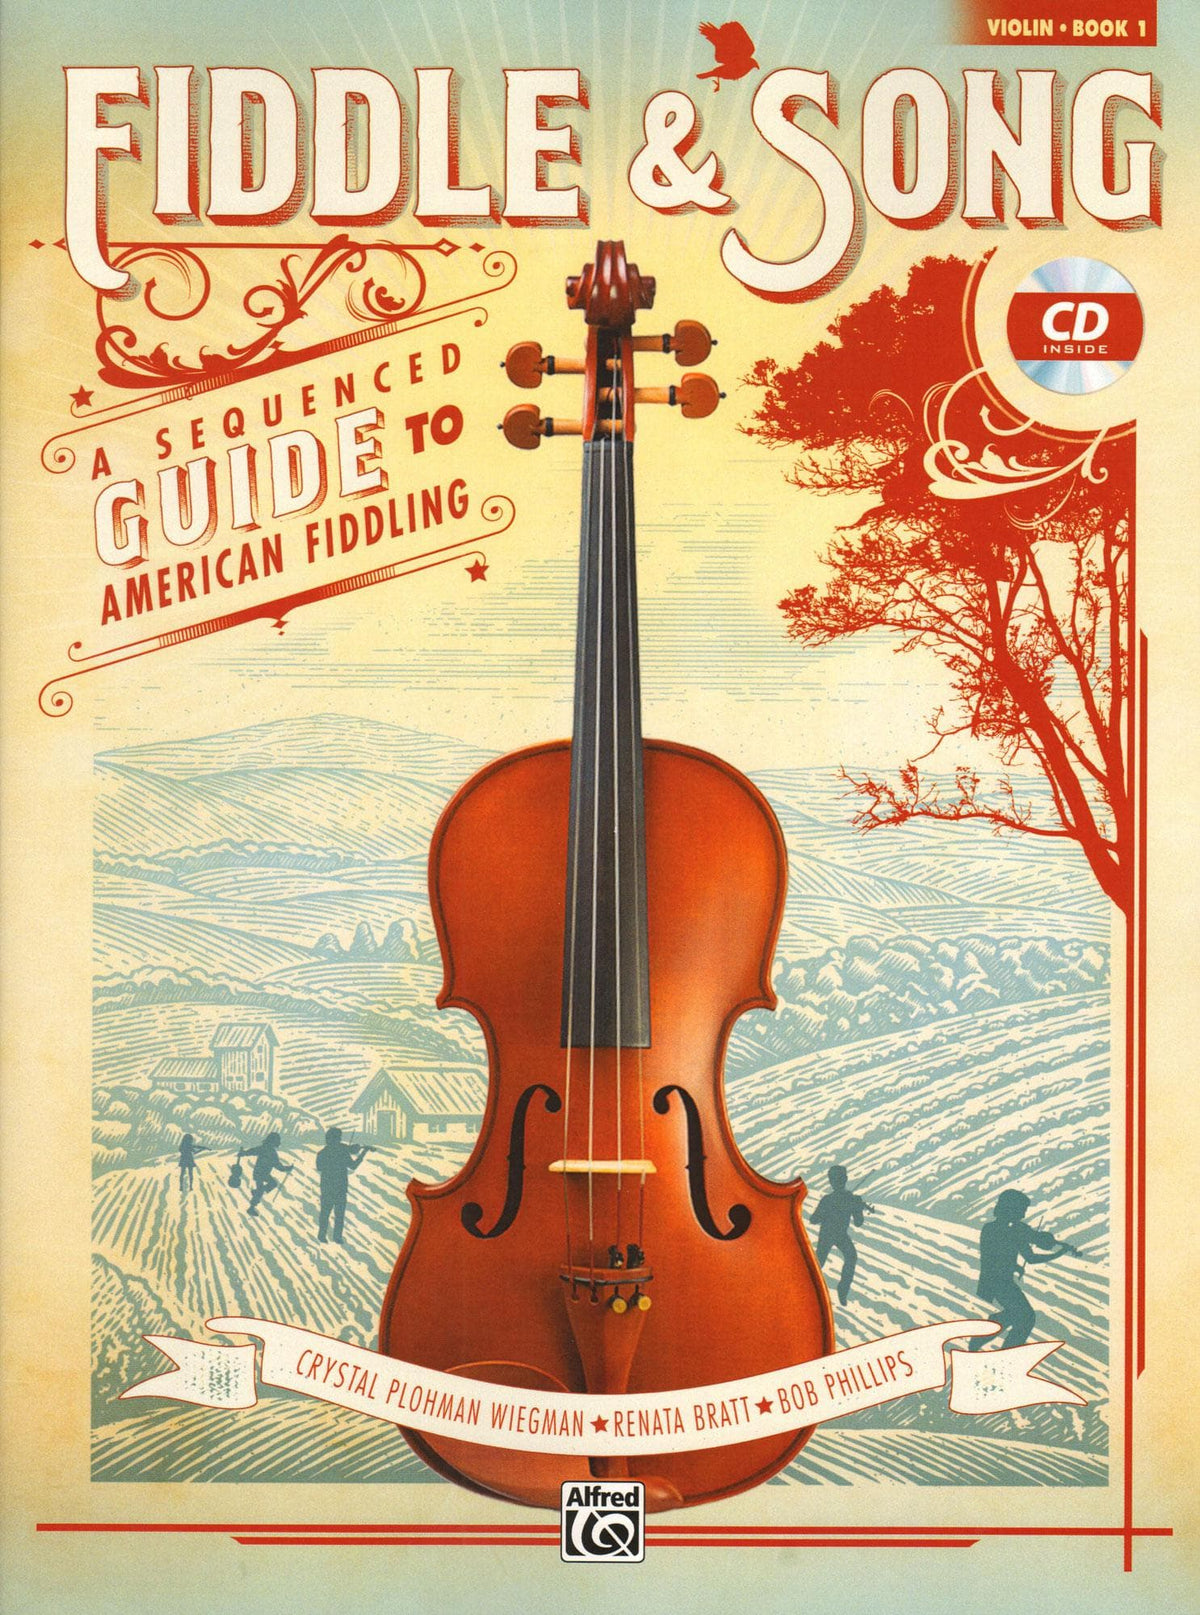 Fiddle & Song - A Sequenced Guide to American Fiddling - by Wiegman, Bratt, and Phillips - Violin Book 1 - Alfred Publishing